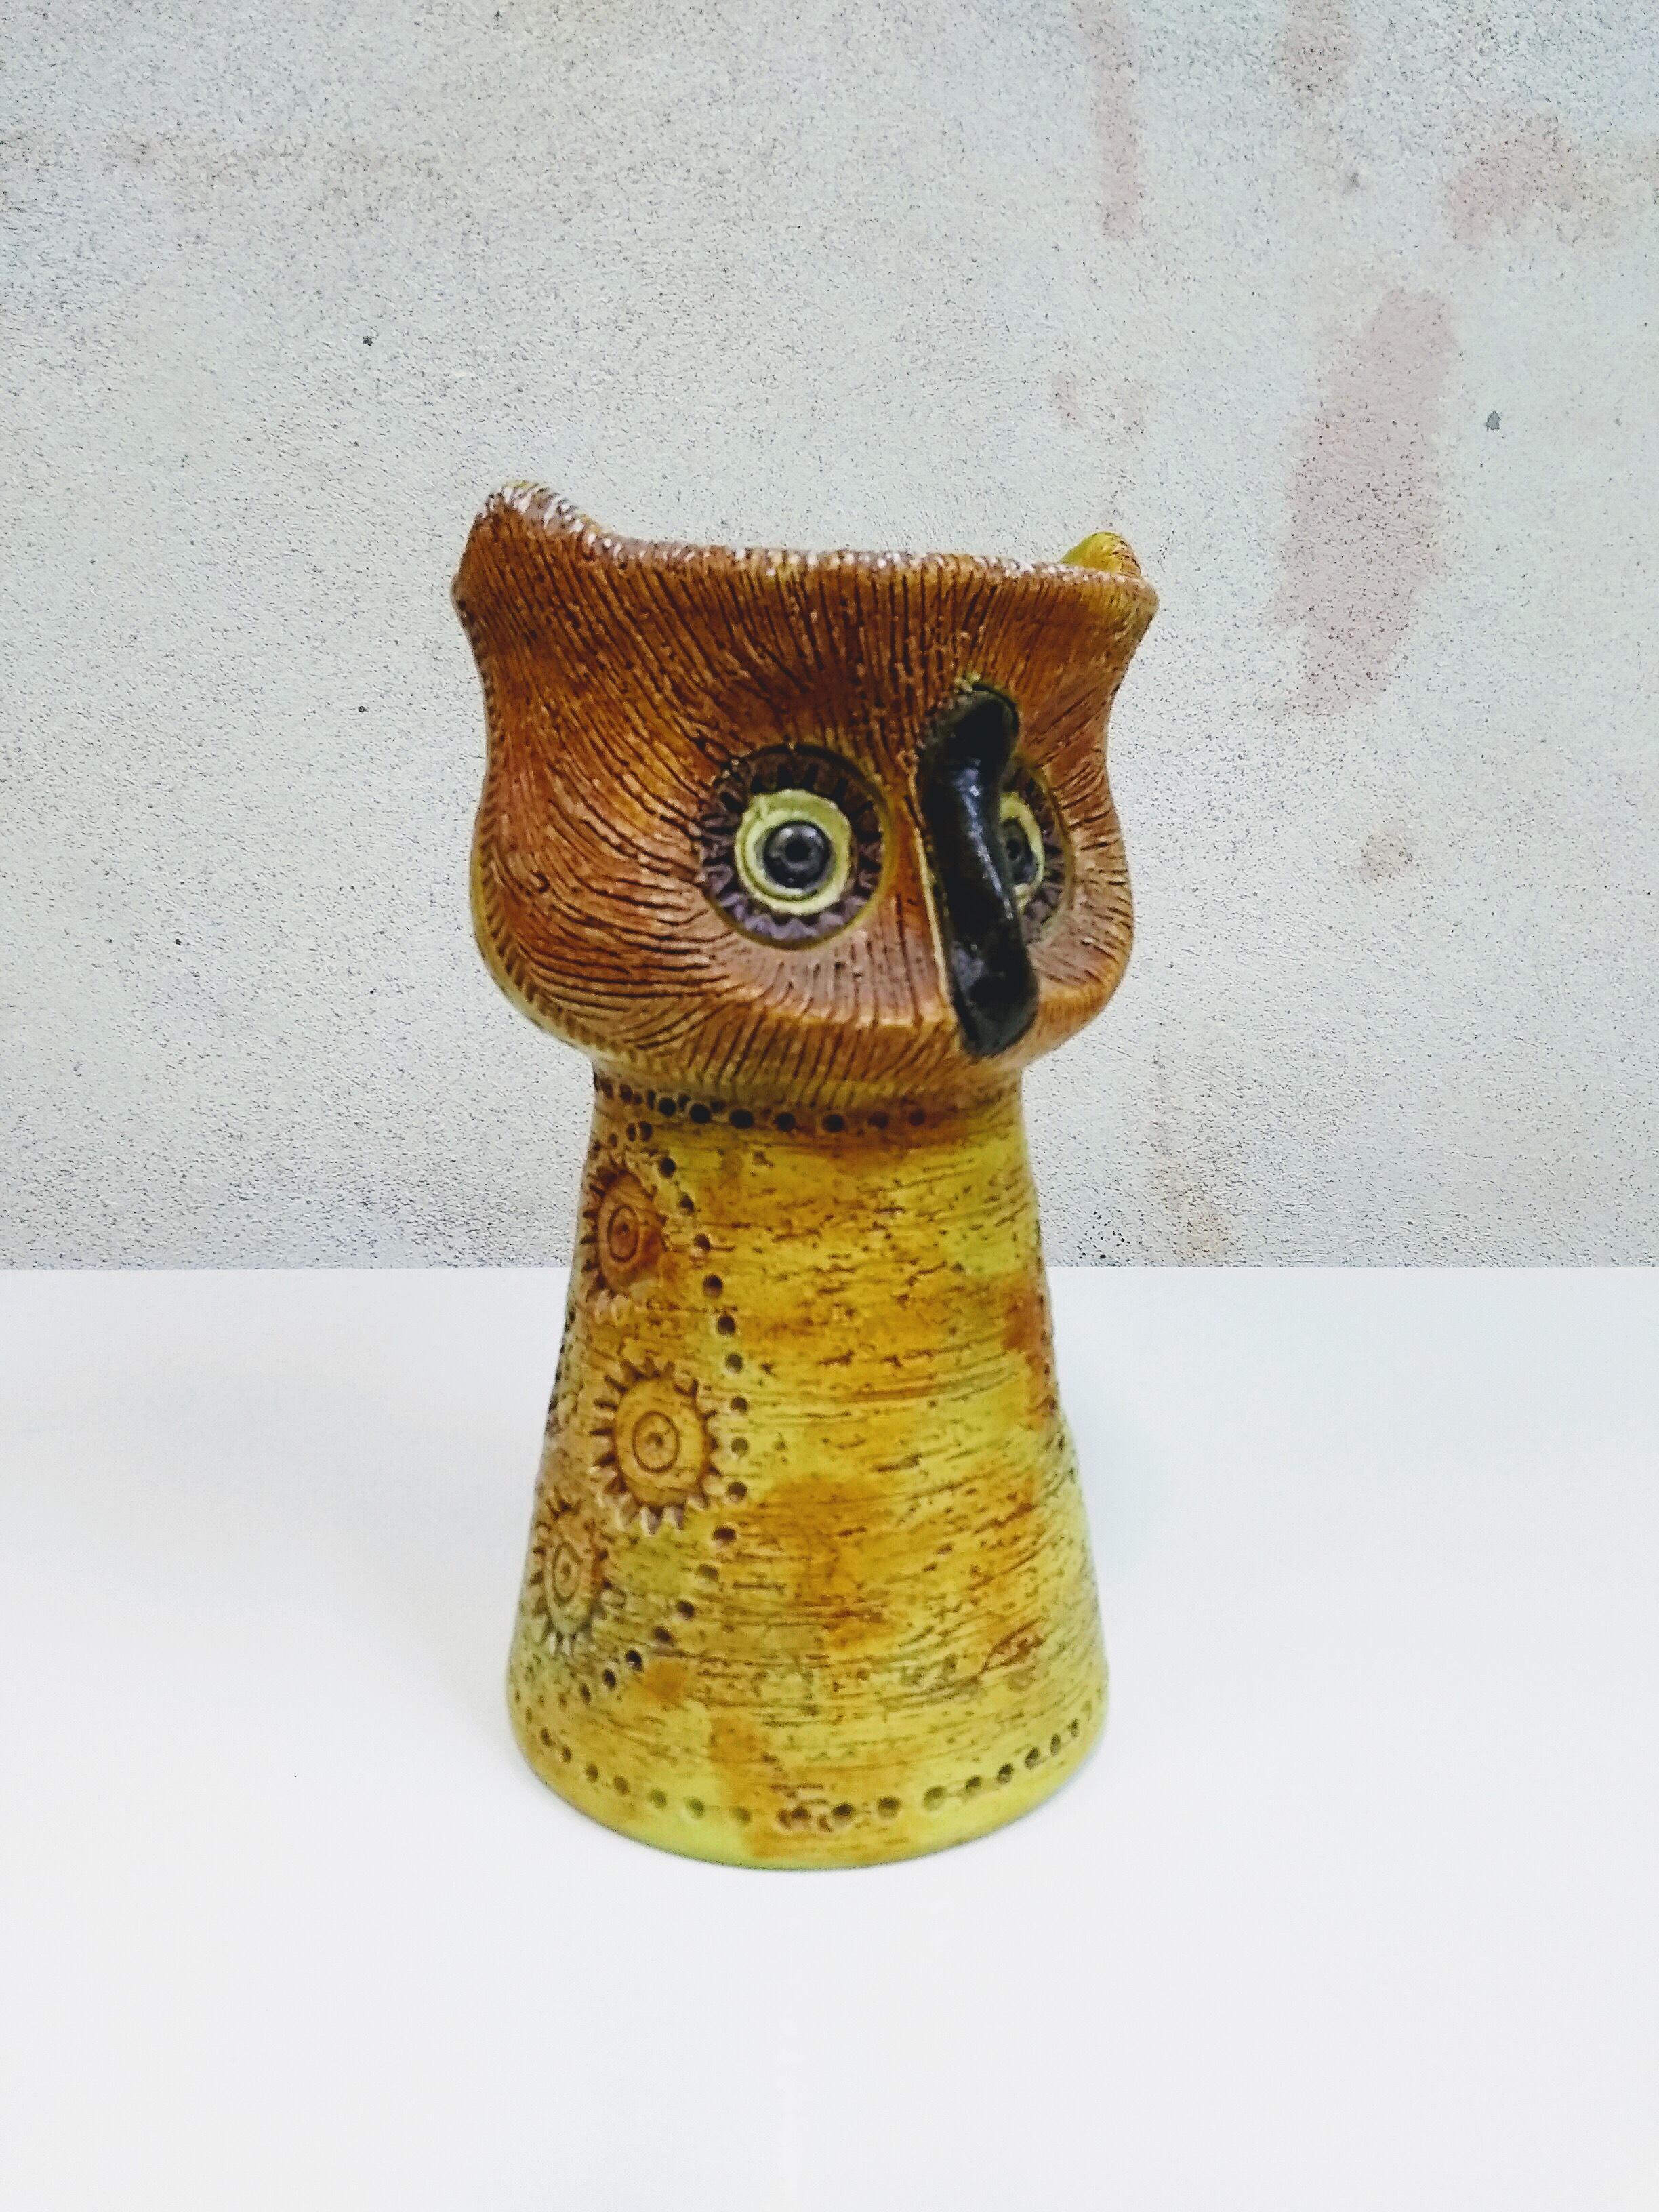 Pottery Aldo Londi Italian Ceramic Owl for Bitossi imported by Rosenthal and Netter